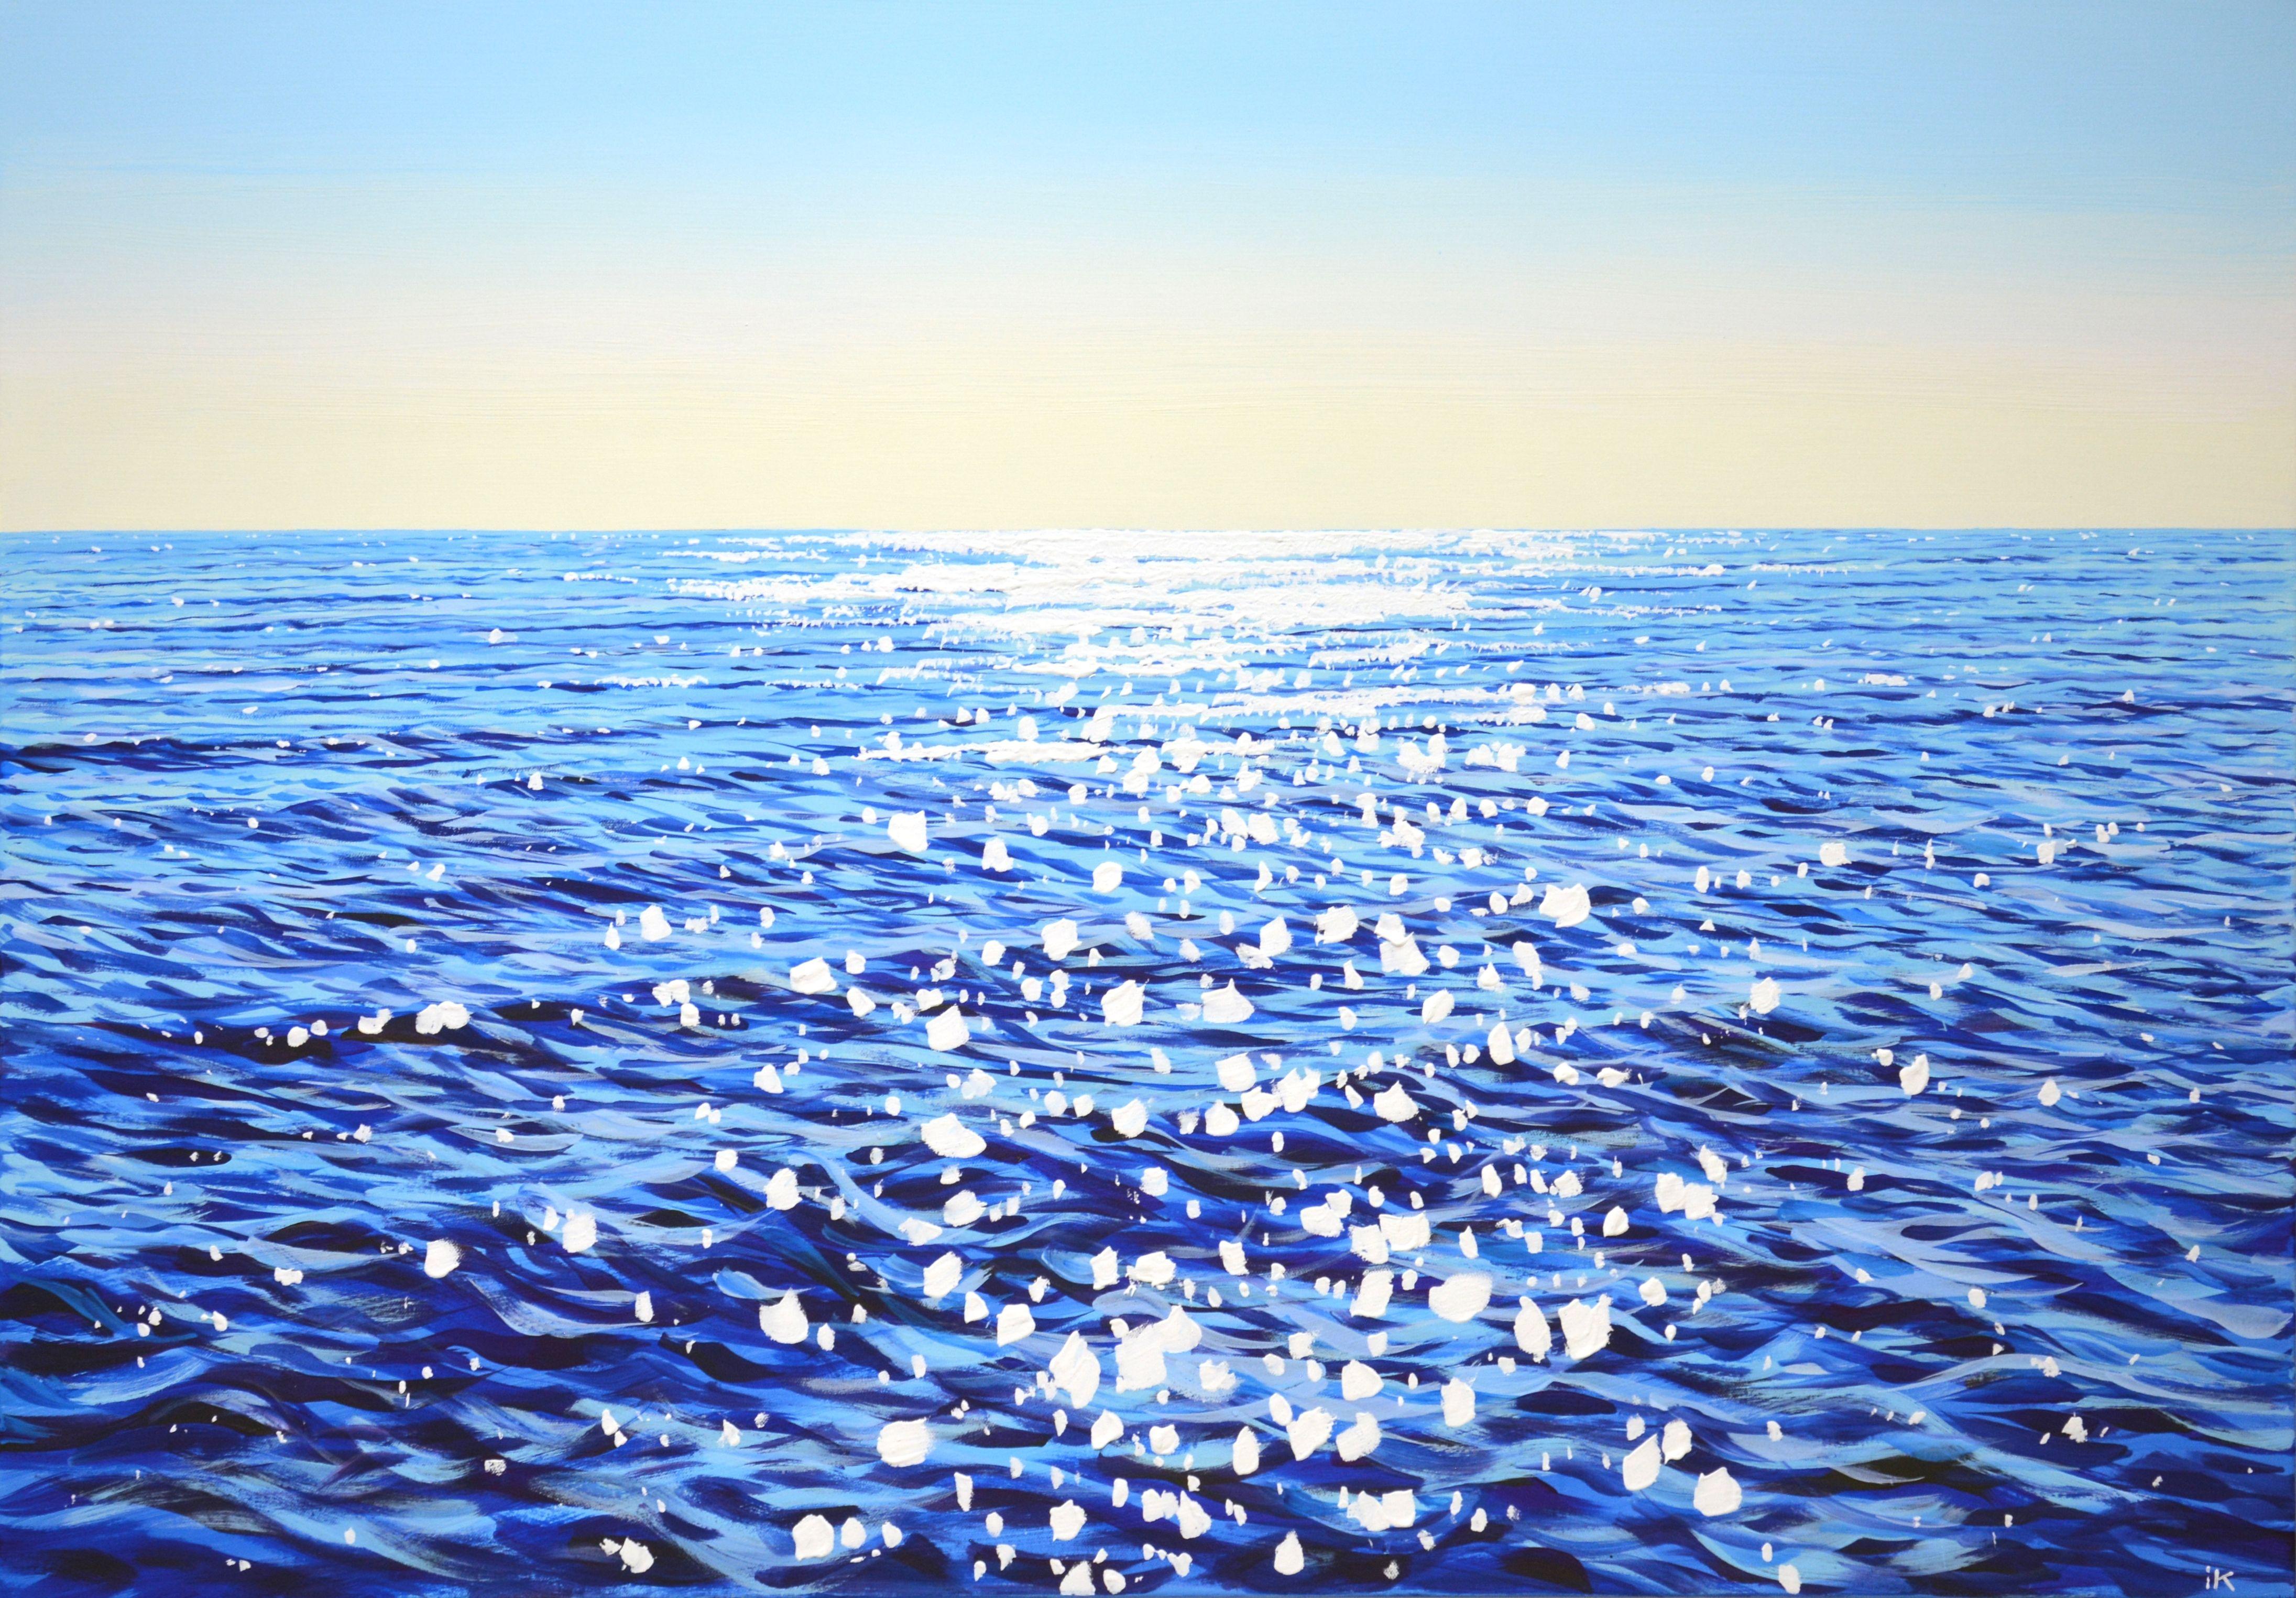 Blue ocean. Glare. Summer seascape: blue water, blue ocean, small waves, sun glare on the water, clear skies create an atmosphere of relaxation and romance. The blue and white palette, made in the style of realism, emphasizes the energy of water.